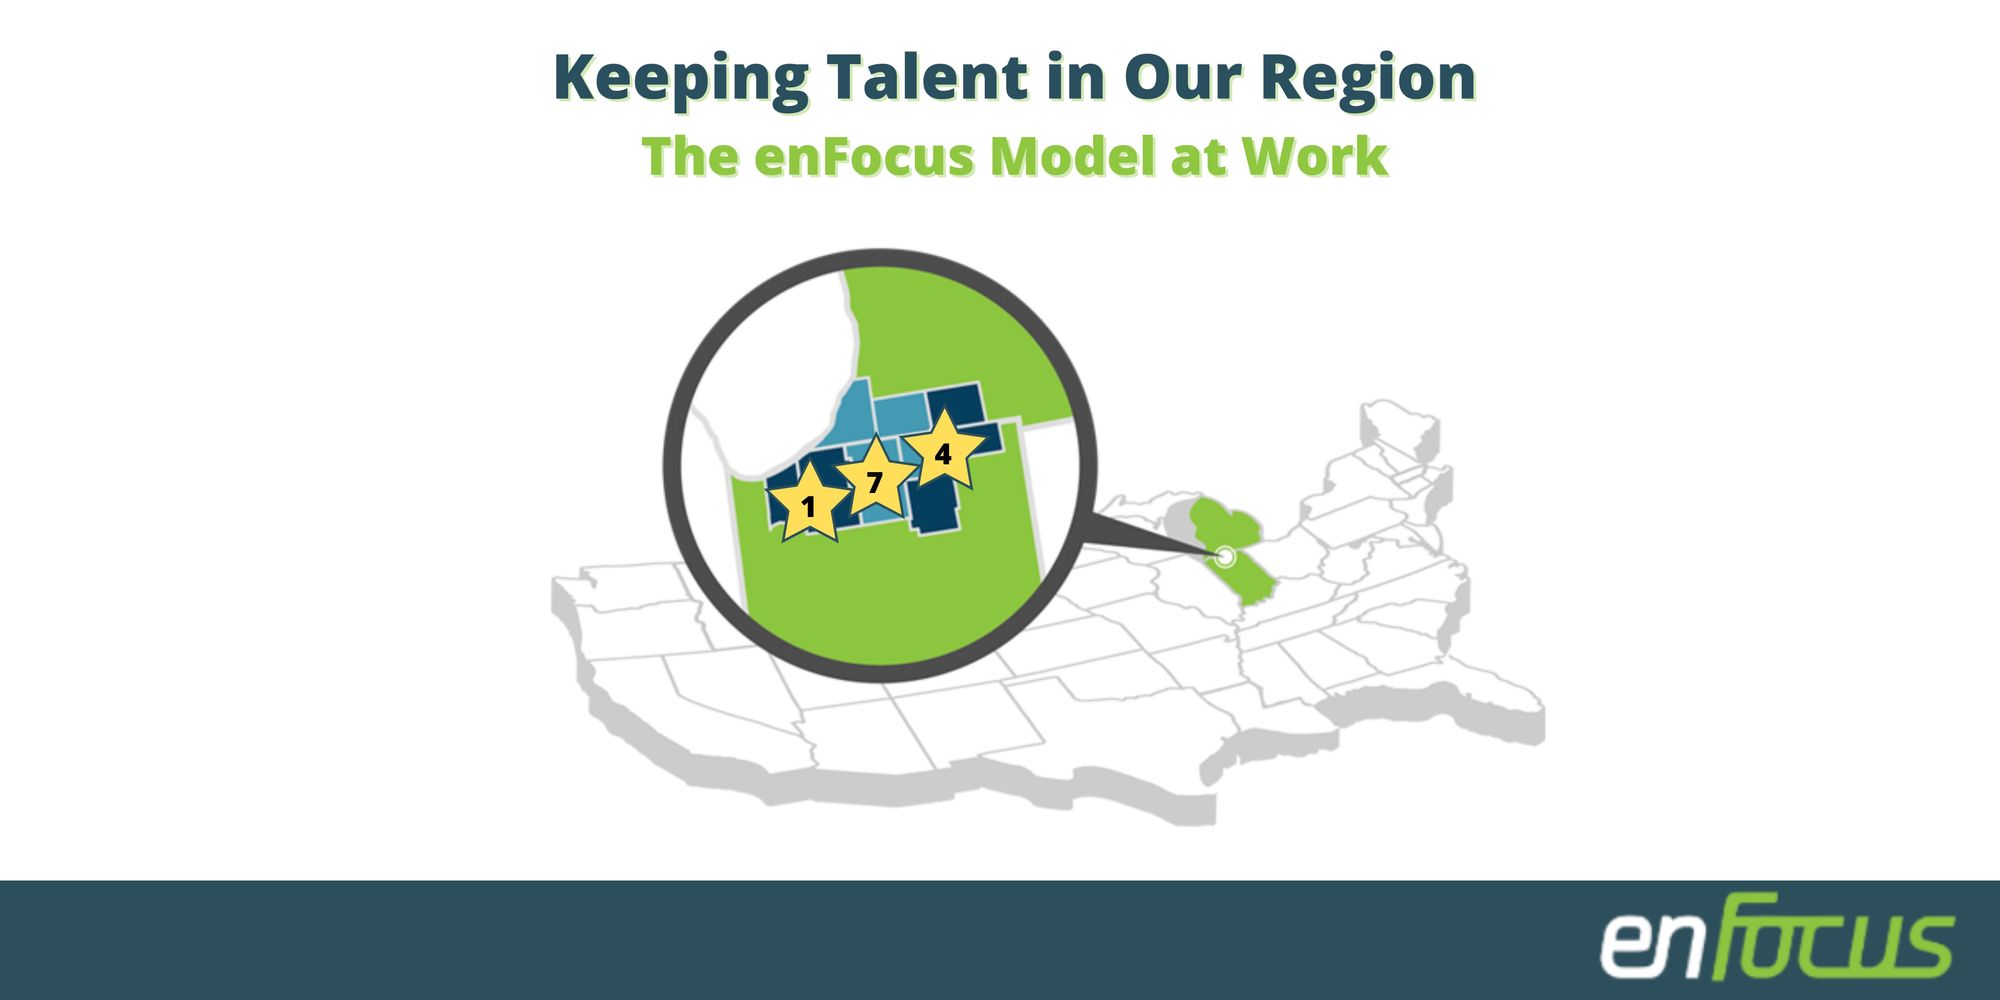 Keeping Talent in Our Region: The enFocus Model at Work